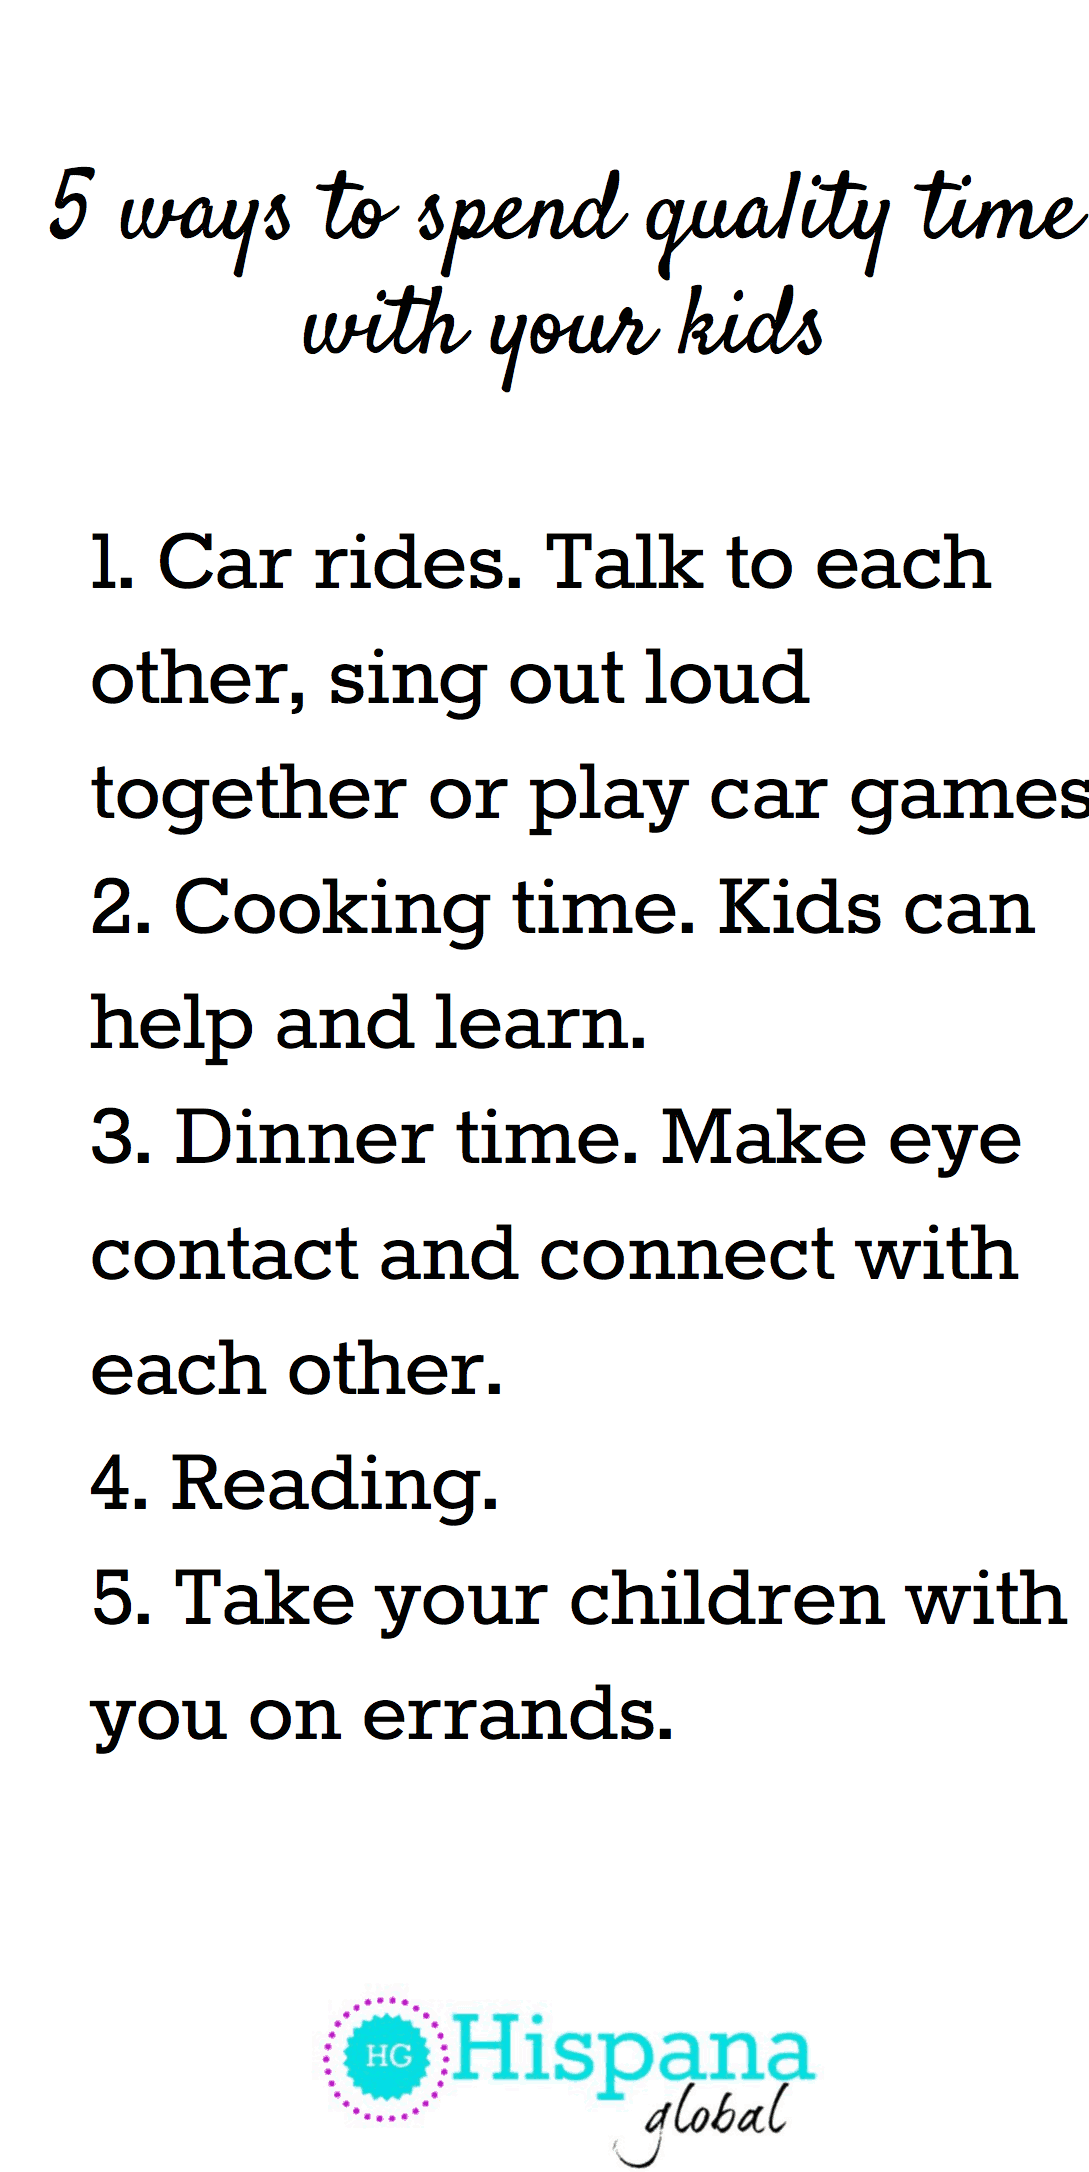 5 ways to spend quality time with kids pin.jpg